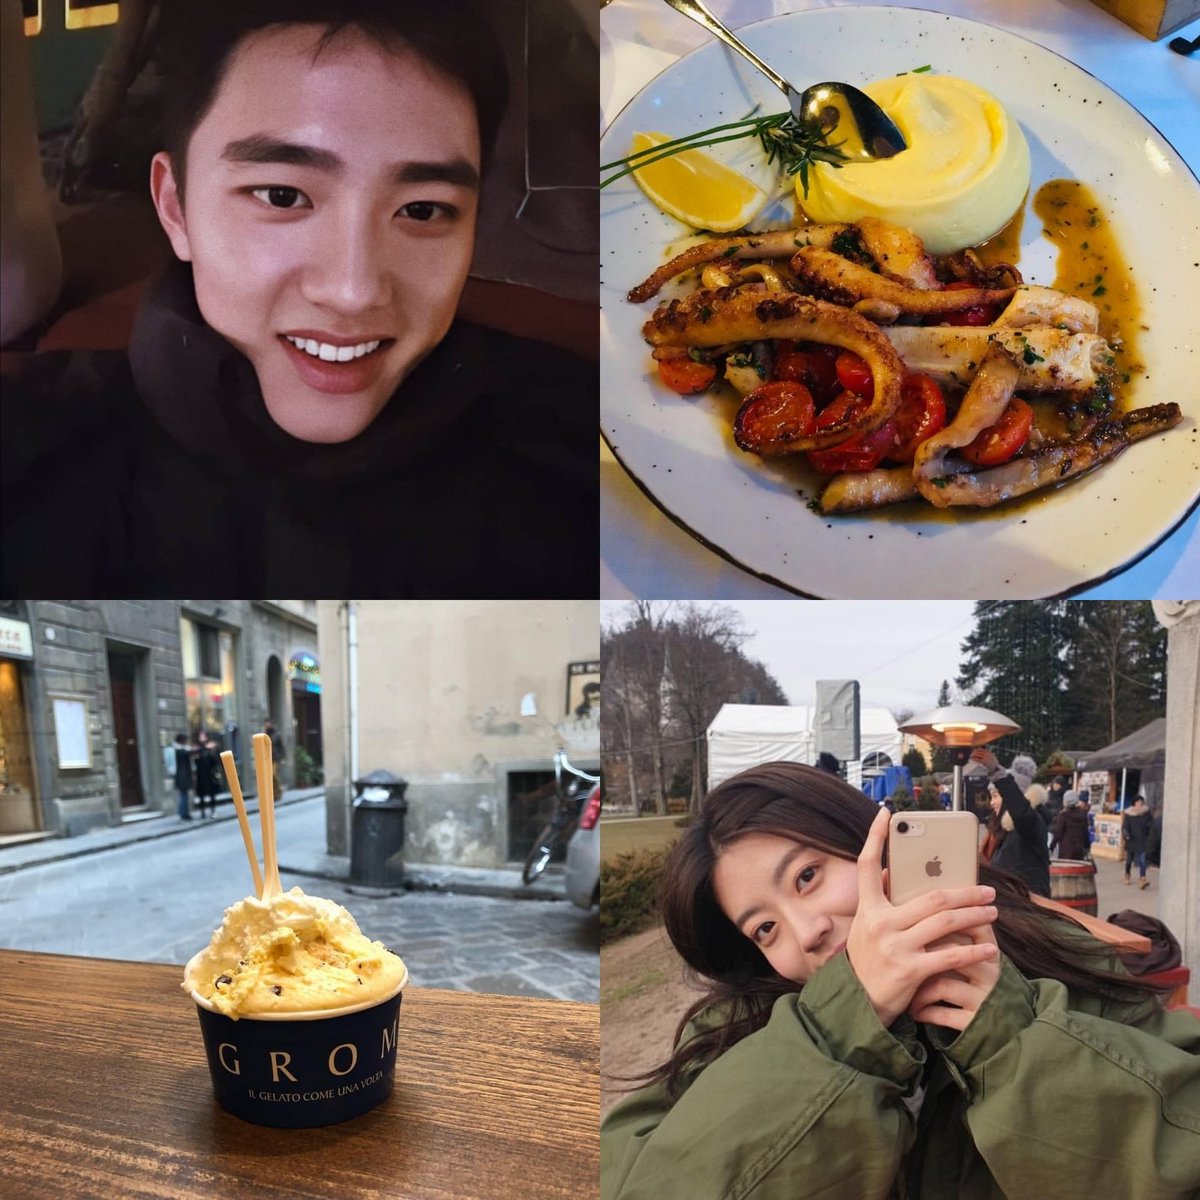 "I know I said I won't even have time to miss you here but everytime I see food, I think of you...""Ah jinjjia...am I really seeing you being clingy with me? This is a first.""I couldn't even eat that gelato w/o thinking of you.""Ya ya, stop! Don't make me miss you more."